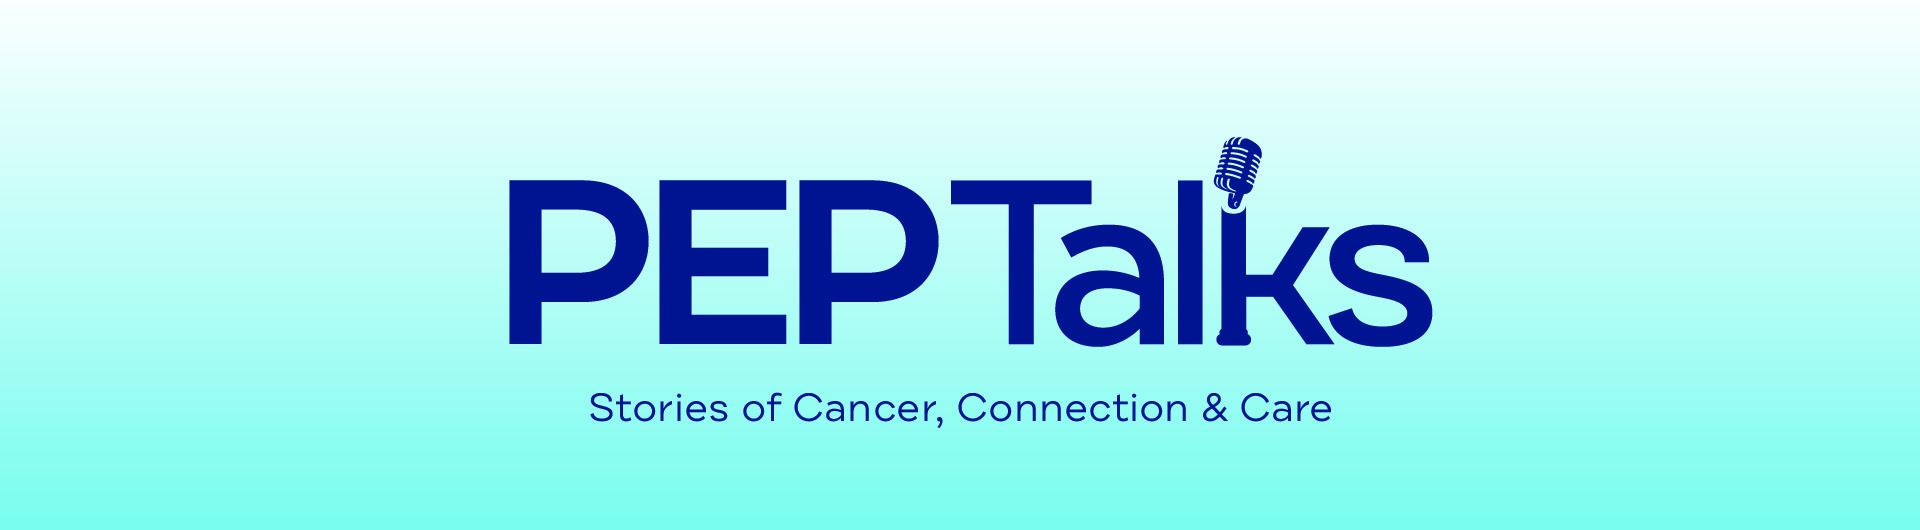 Pep Talks - Stories of Cancer, Connection and Care